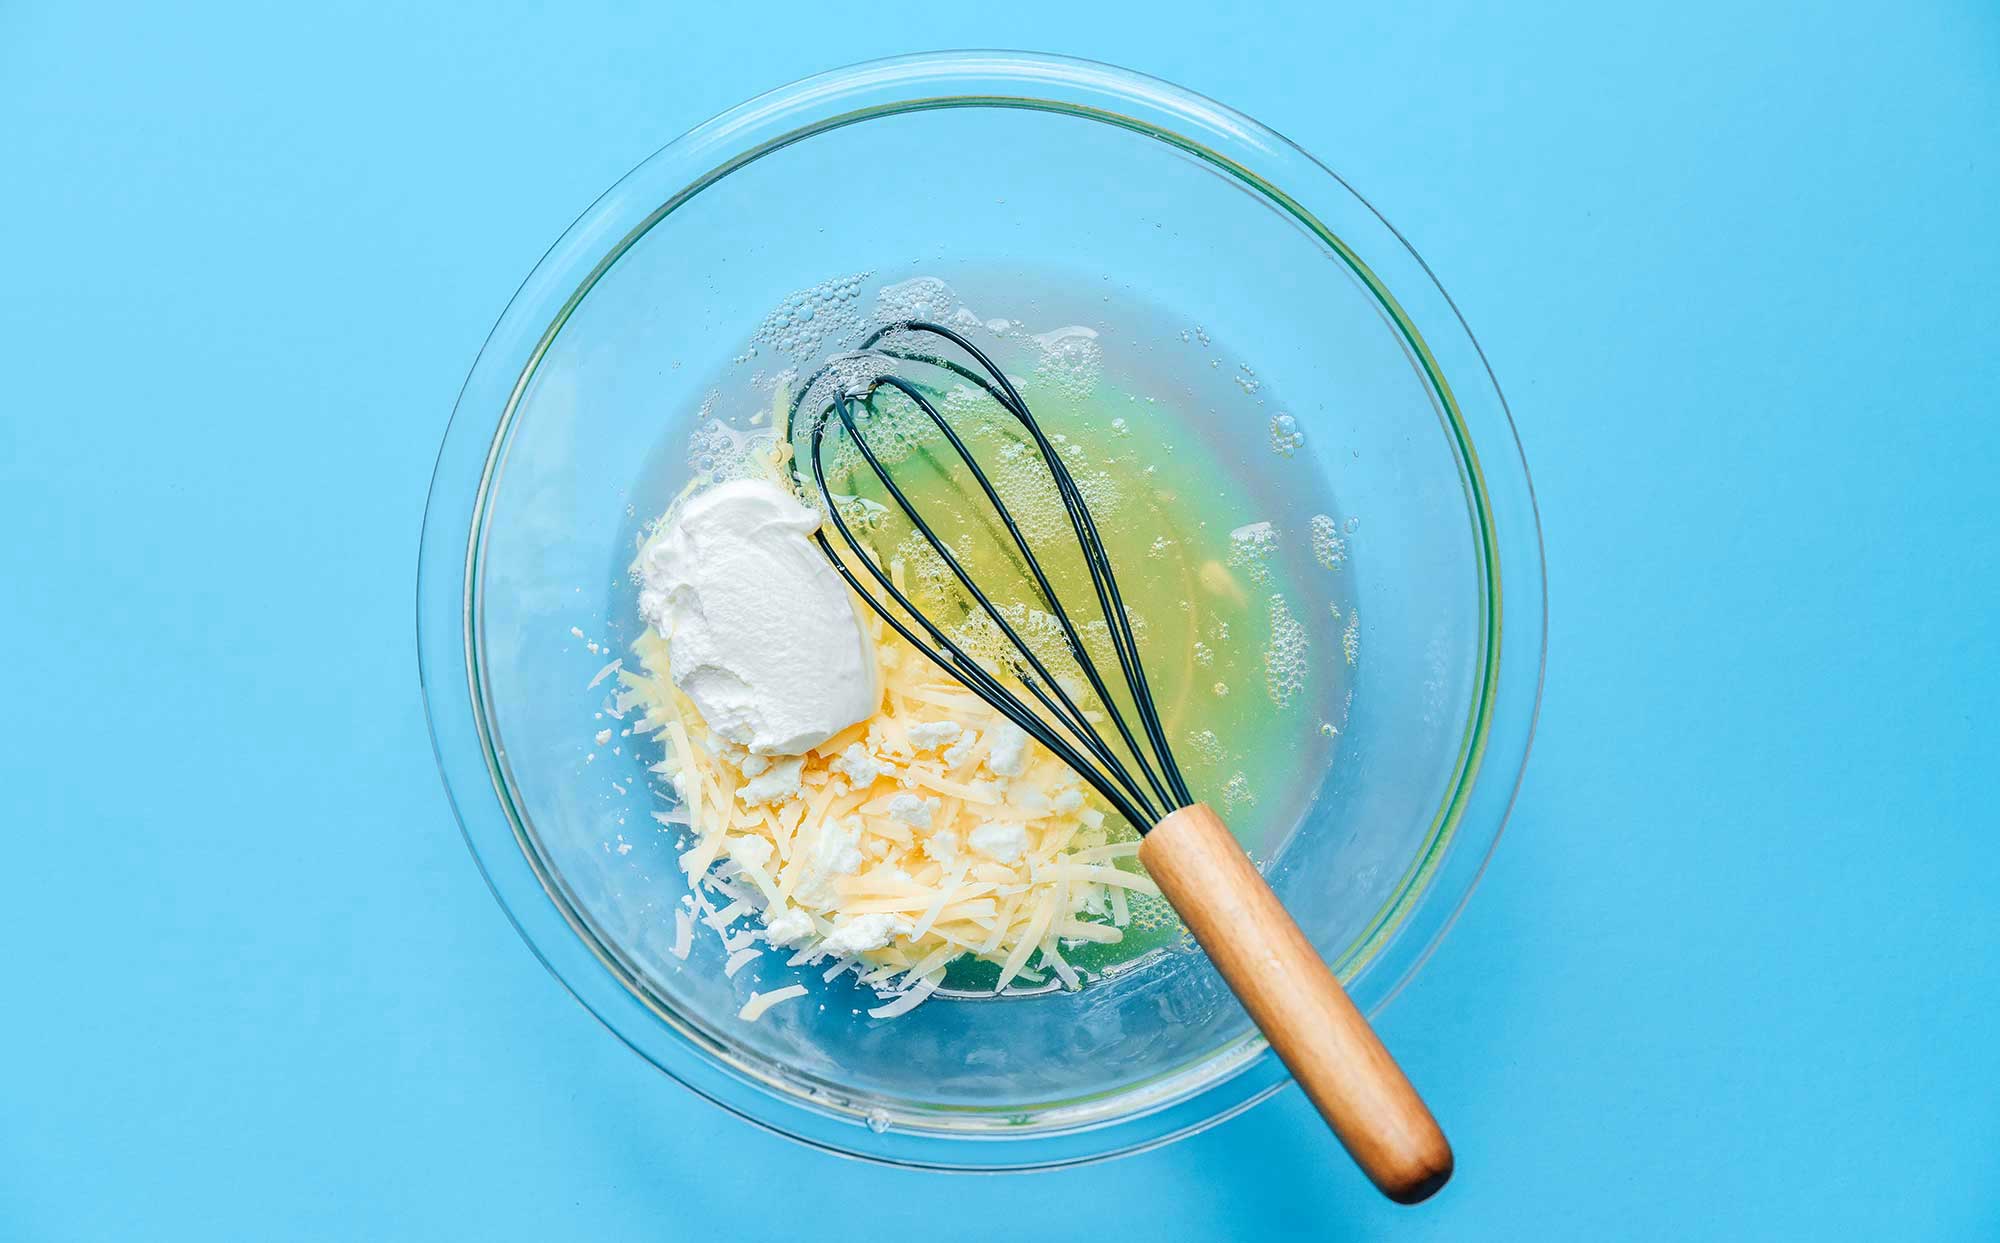 A whisk in a clear glass bowl filled with egg whites, sour cream, feta, and parmesan